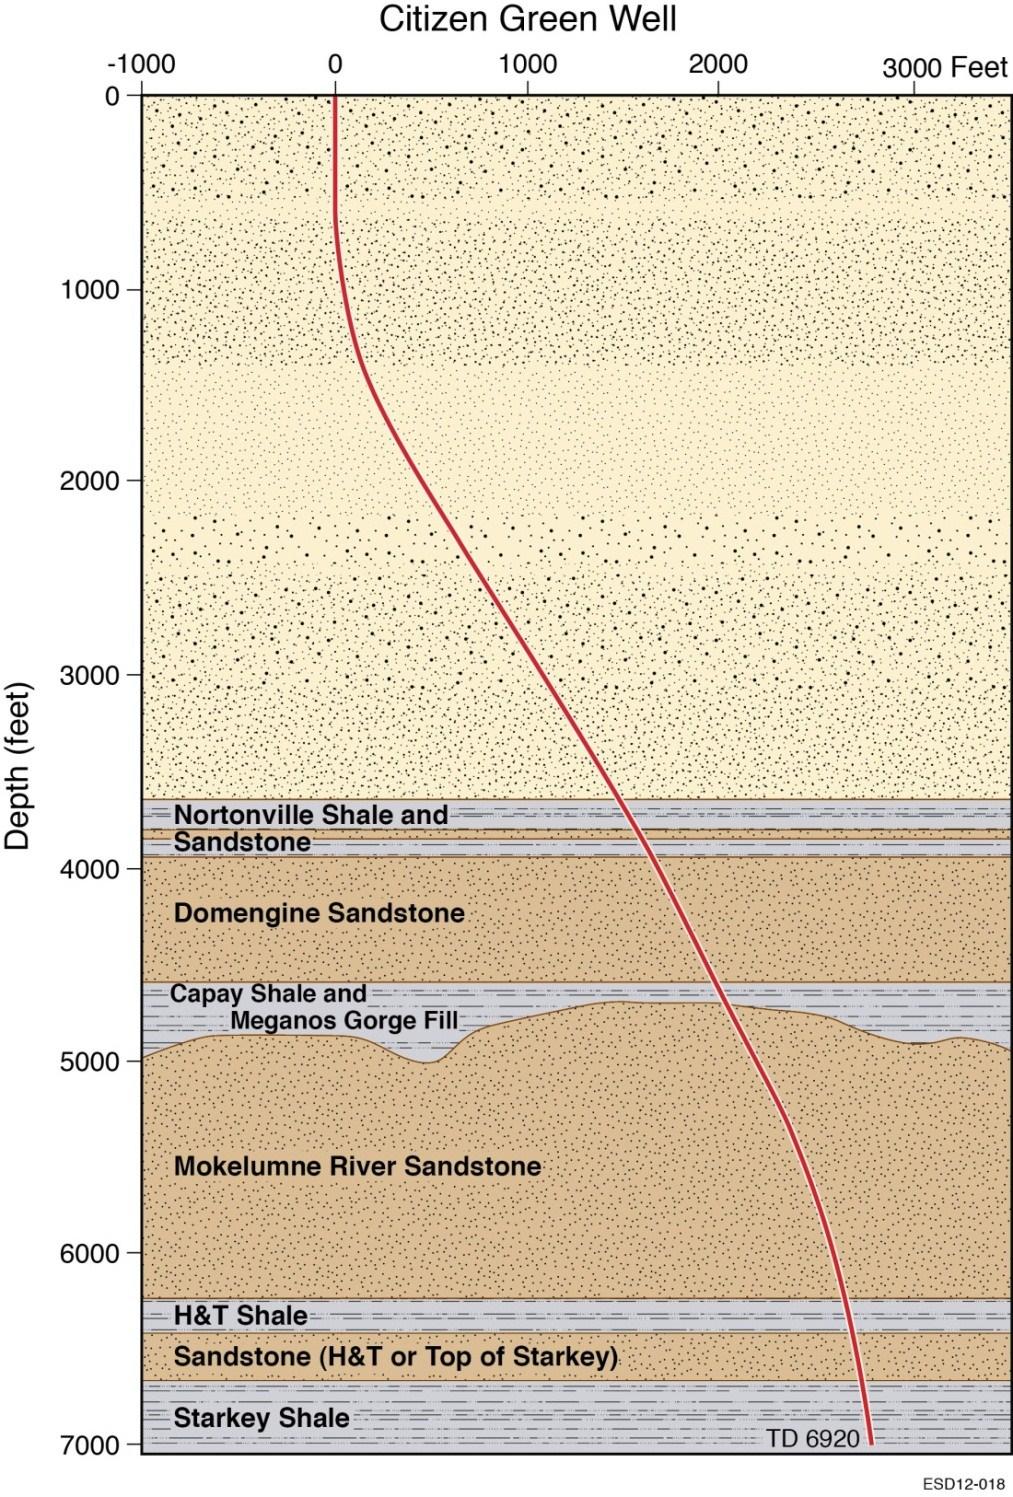 Target Storage Formations Note: gorge fill has shale-like